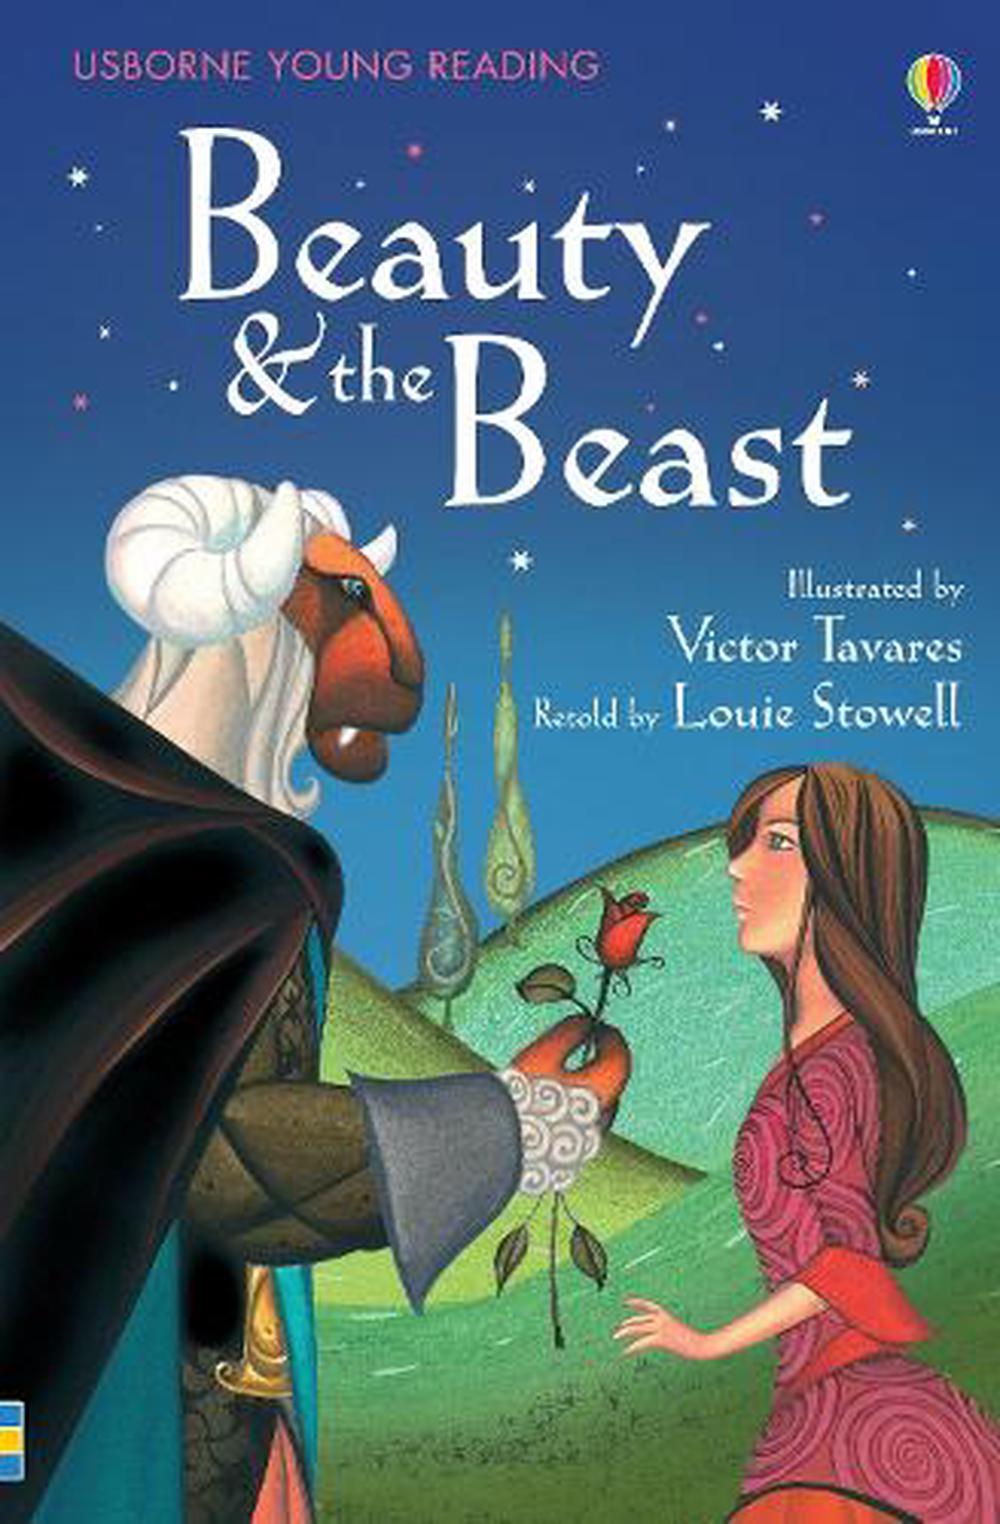 Beauty and the Beast by Louie Stowell, Hardcover, 9780746070604 | Buy ...